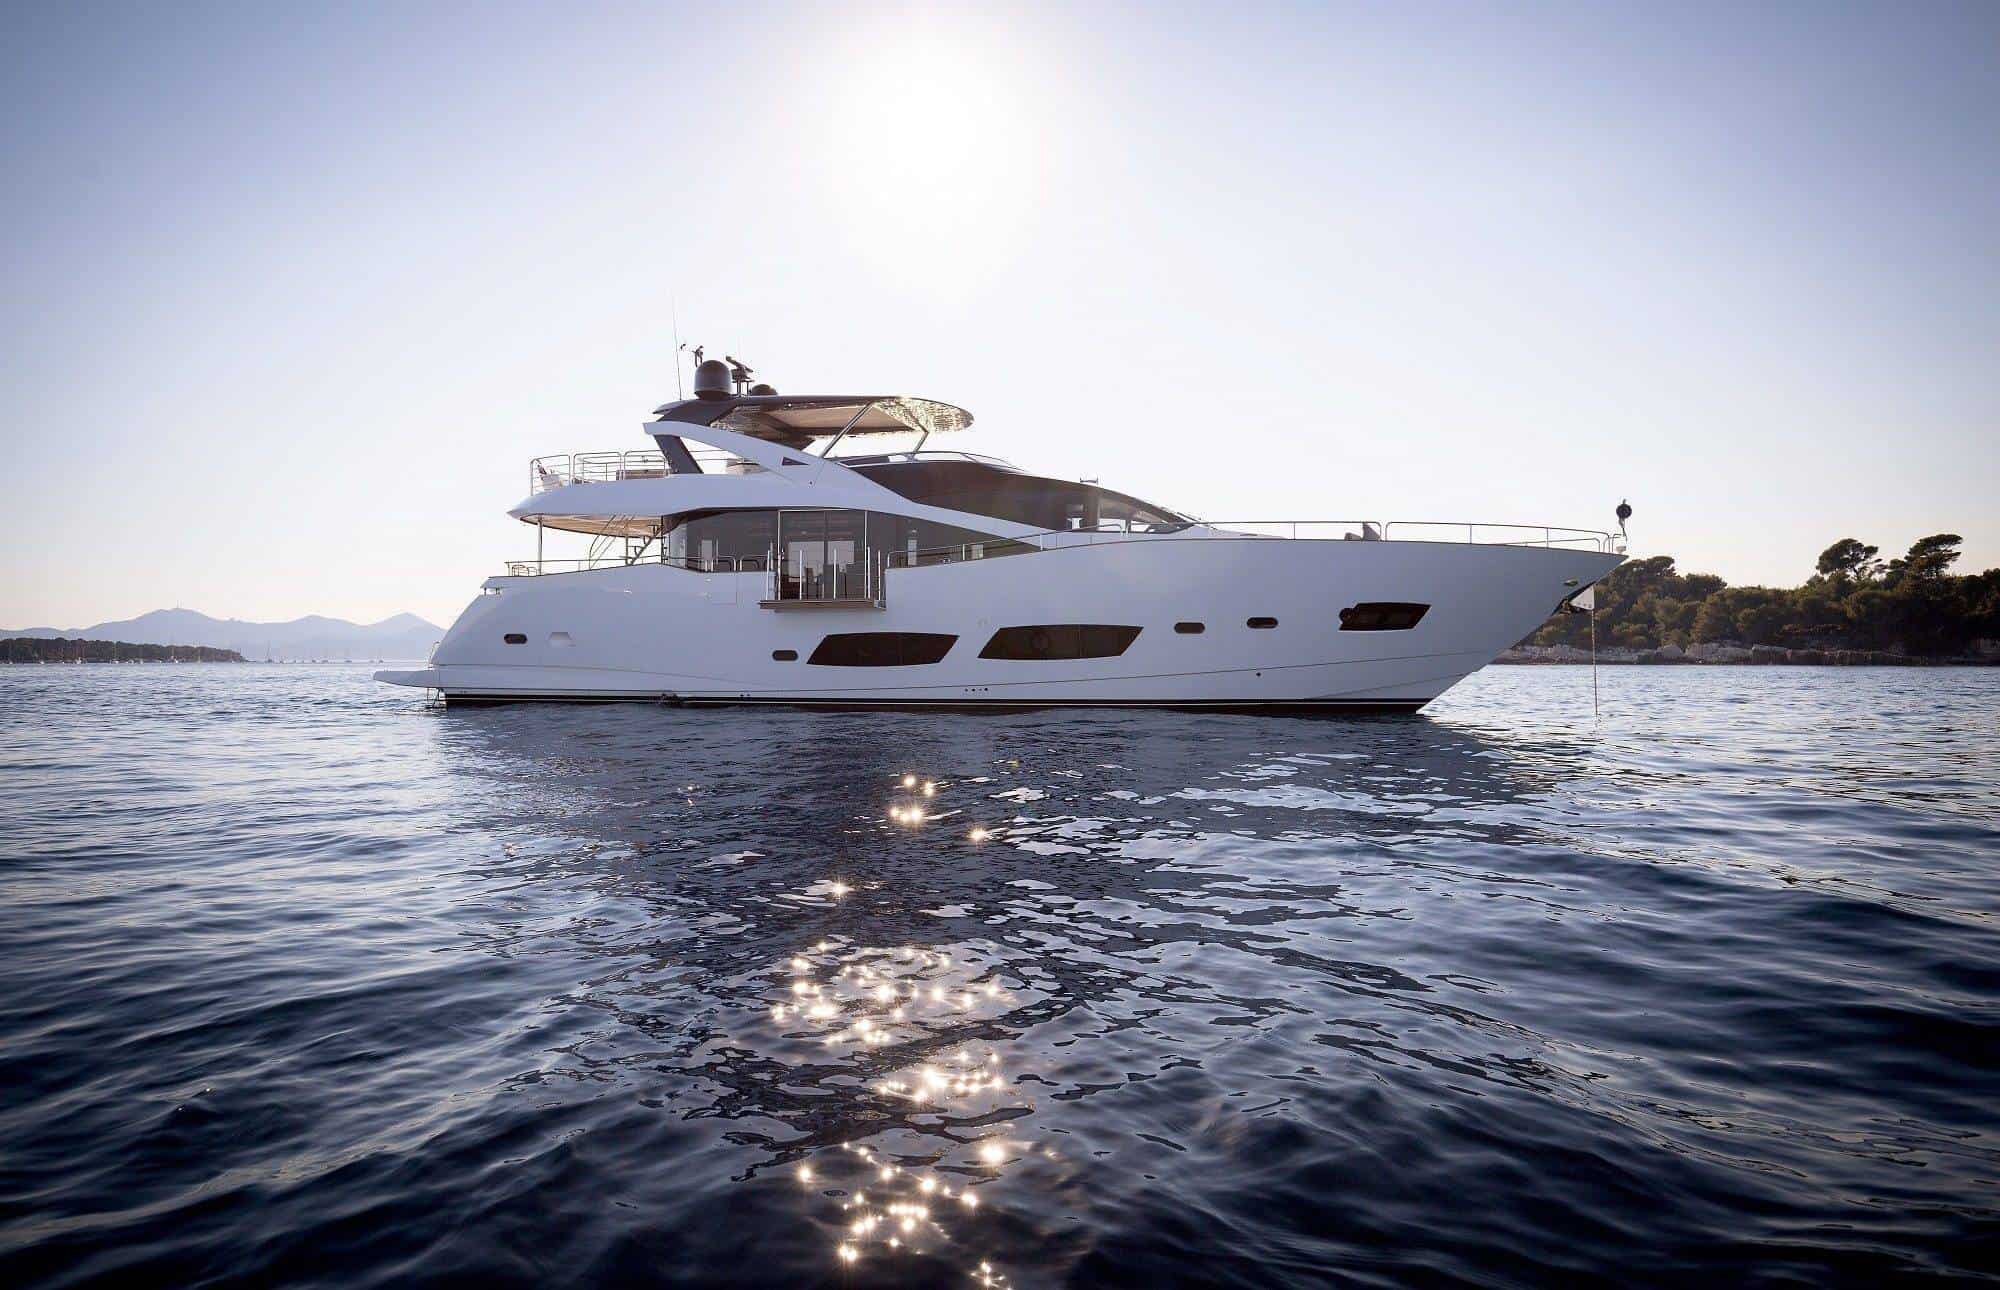 Sunseeker – not your average boat